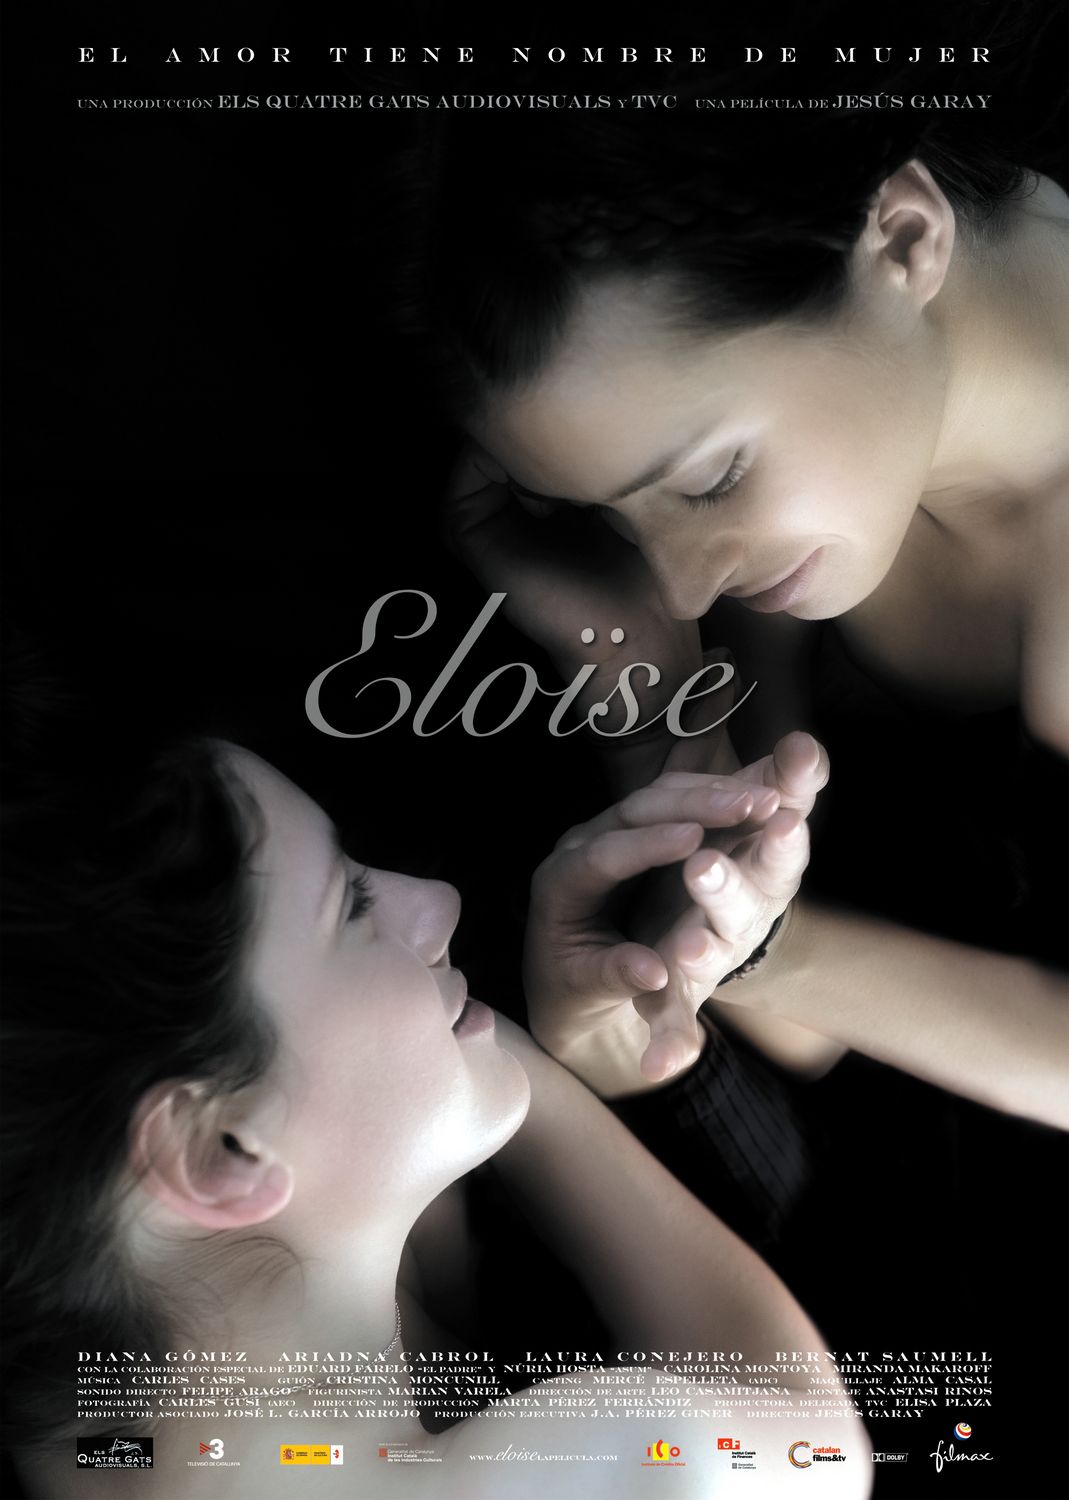 Extra Large Movie Poster Image for Eloïse 